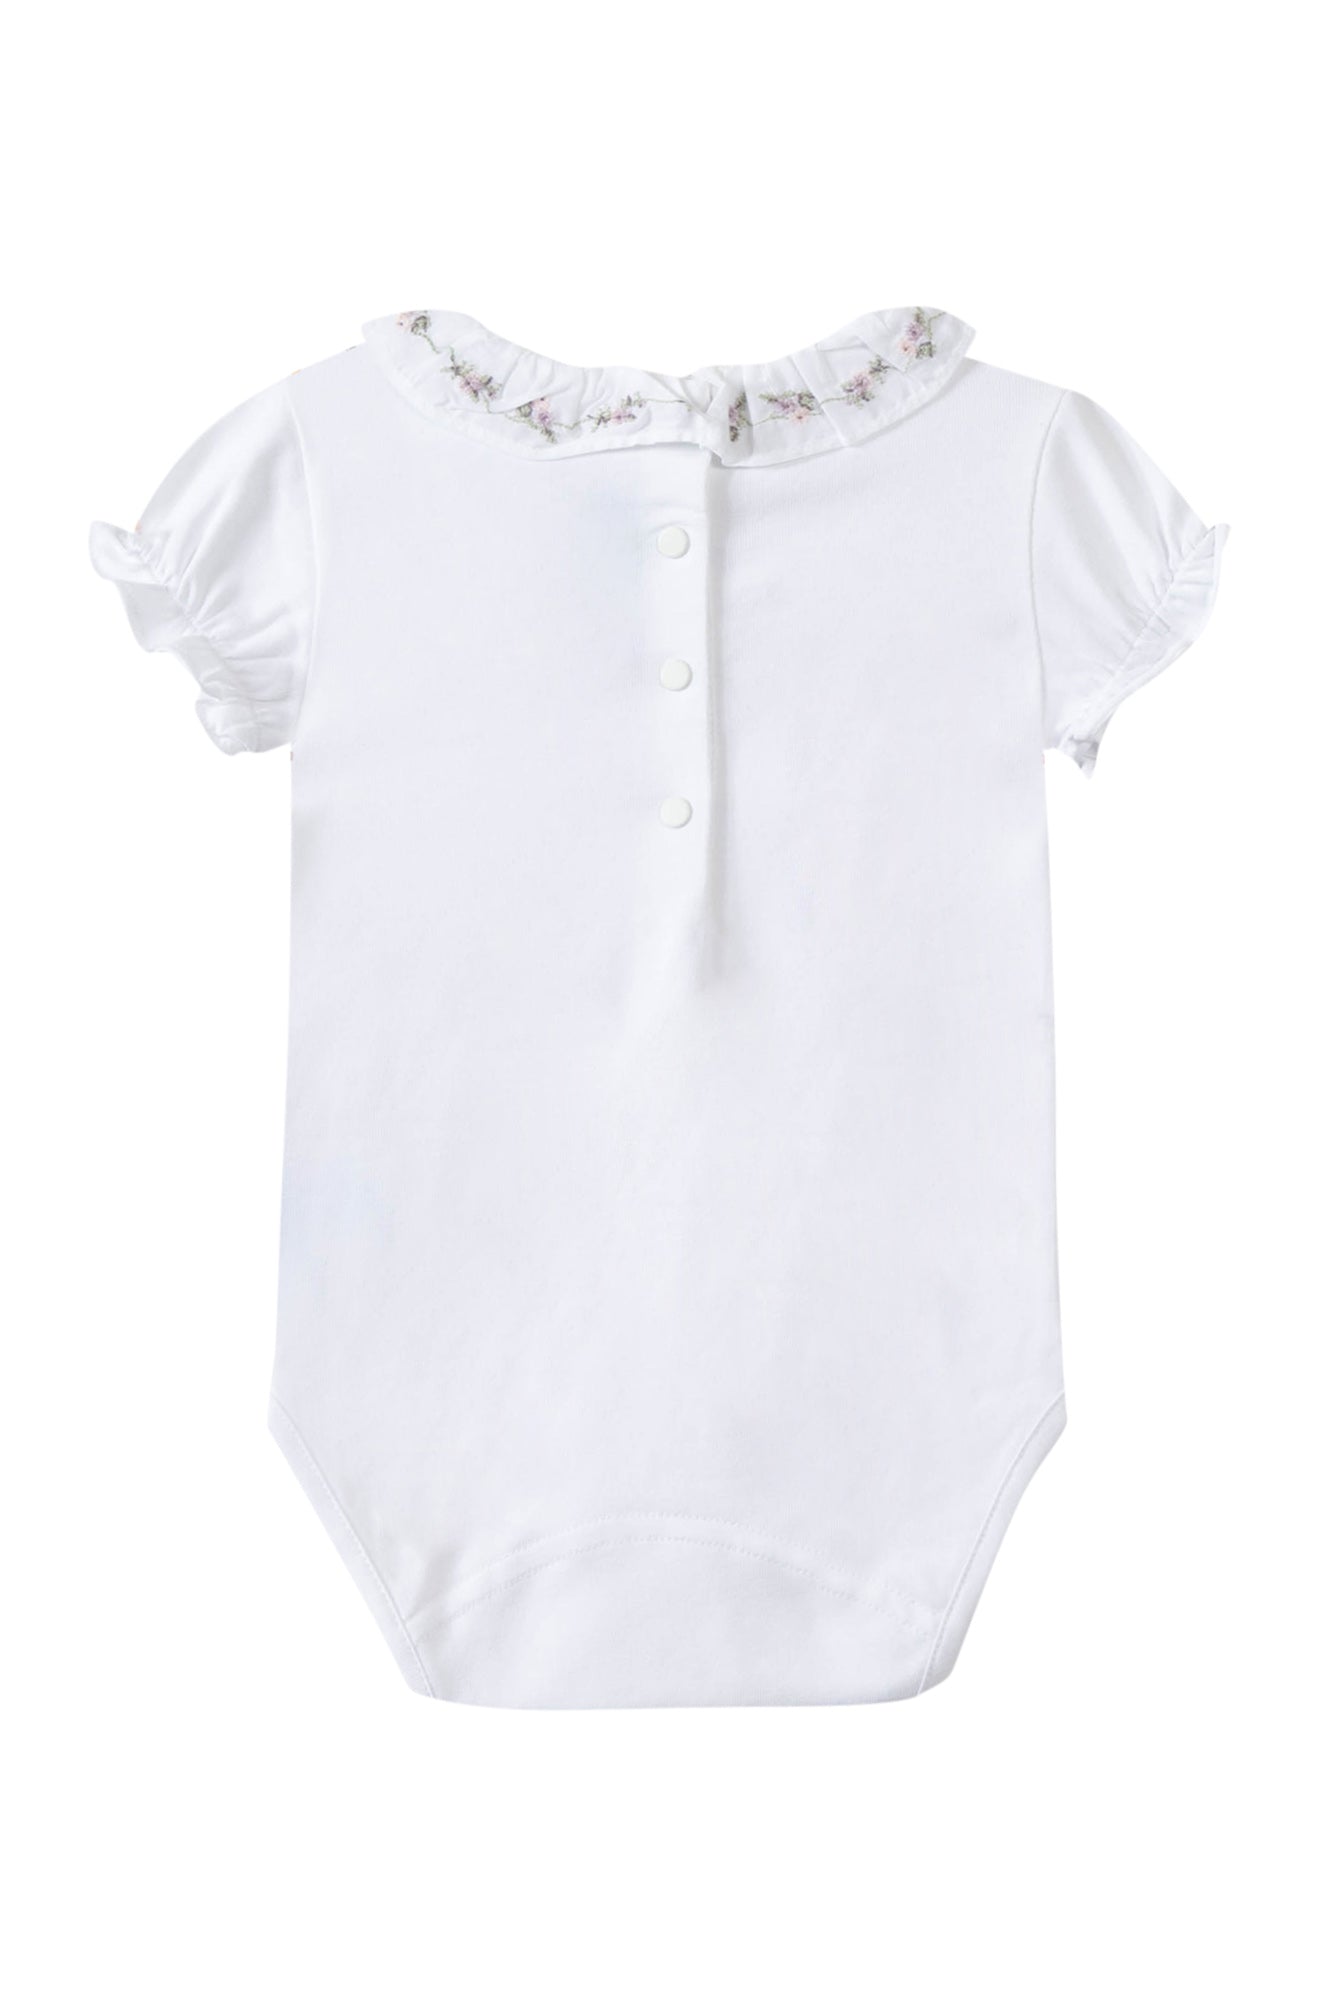 Bodysuit - White jersey with floral embroidered collar - Tartine Et Chocolat